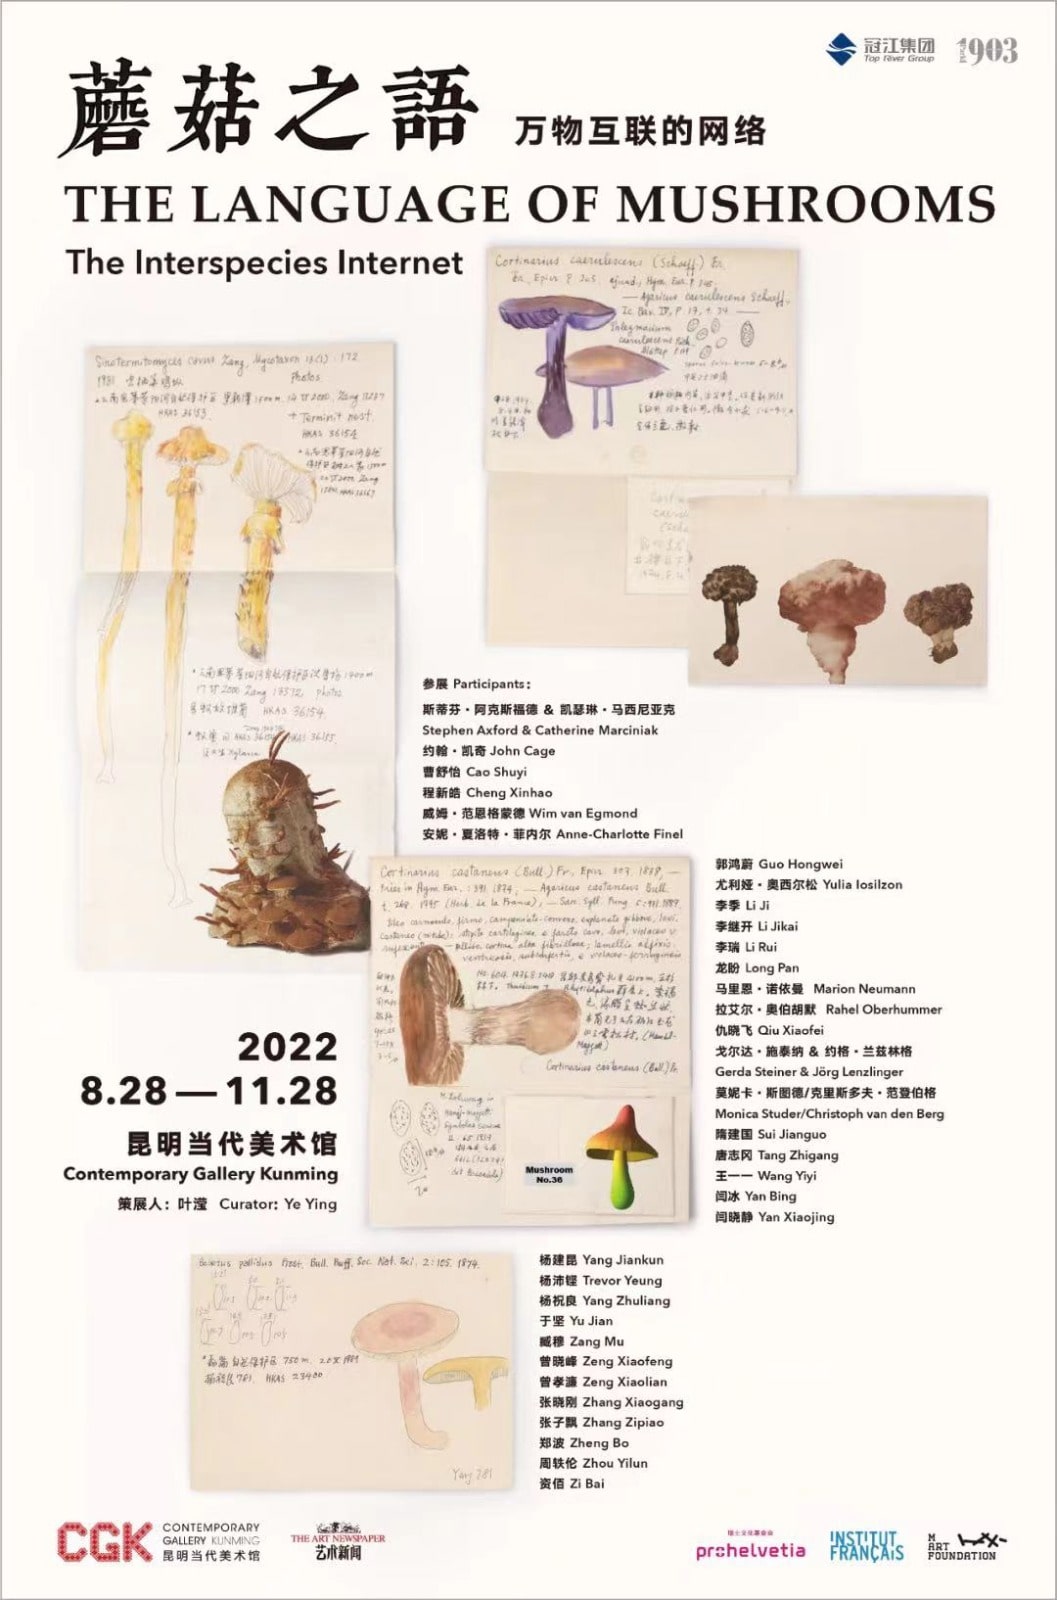 Trevor Yeung participates in group show “The Language of Mushrooms” at Contemporary Gallery Kunming